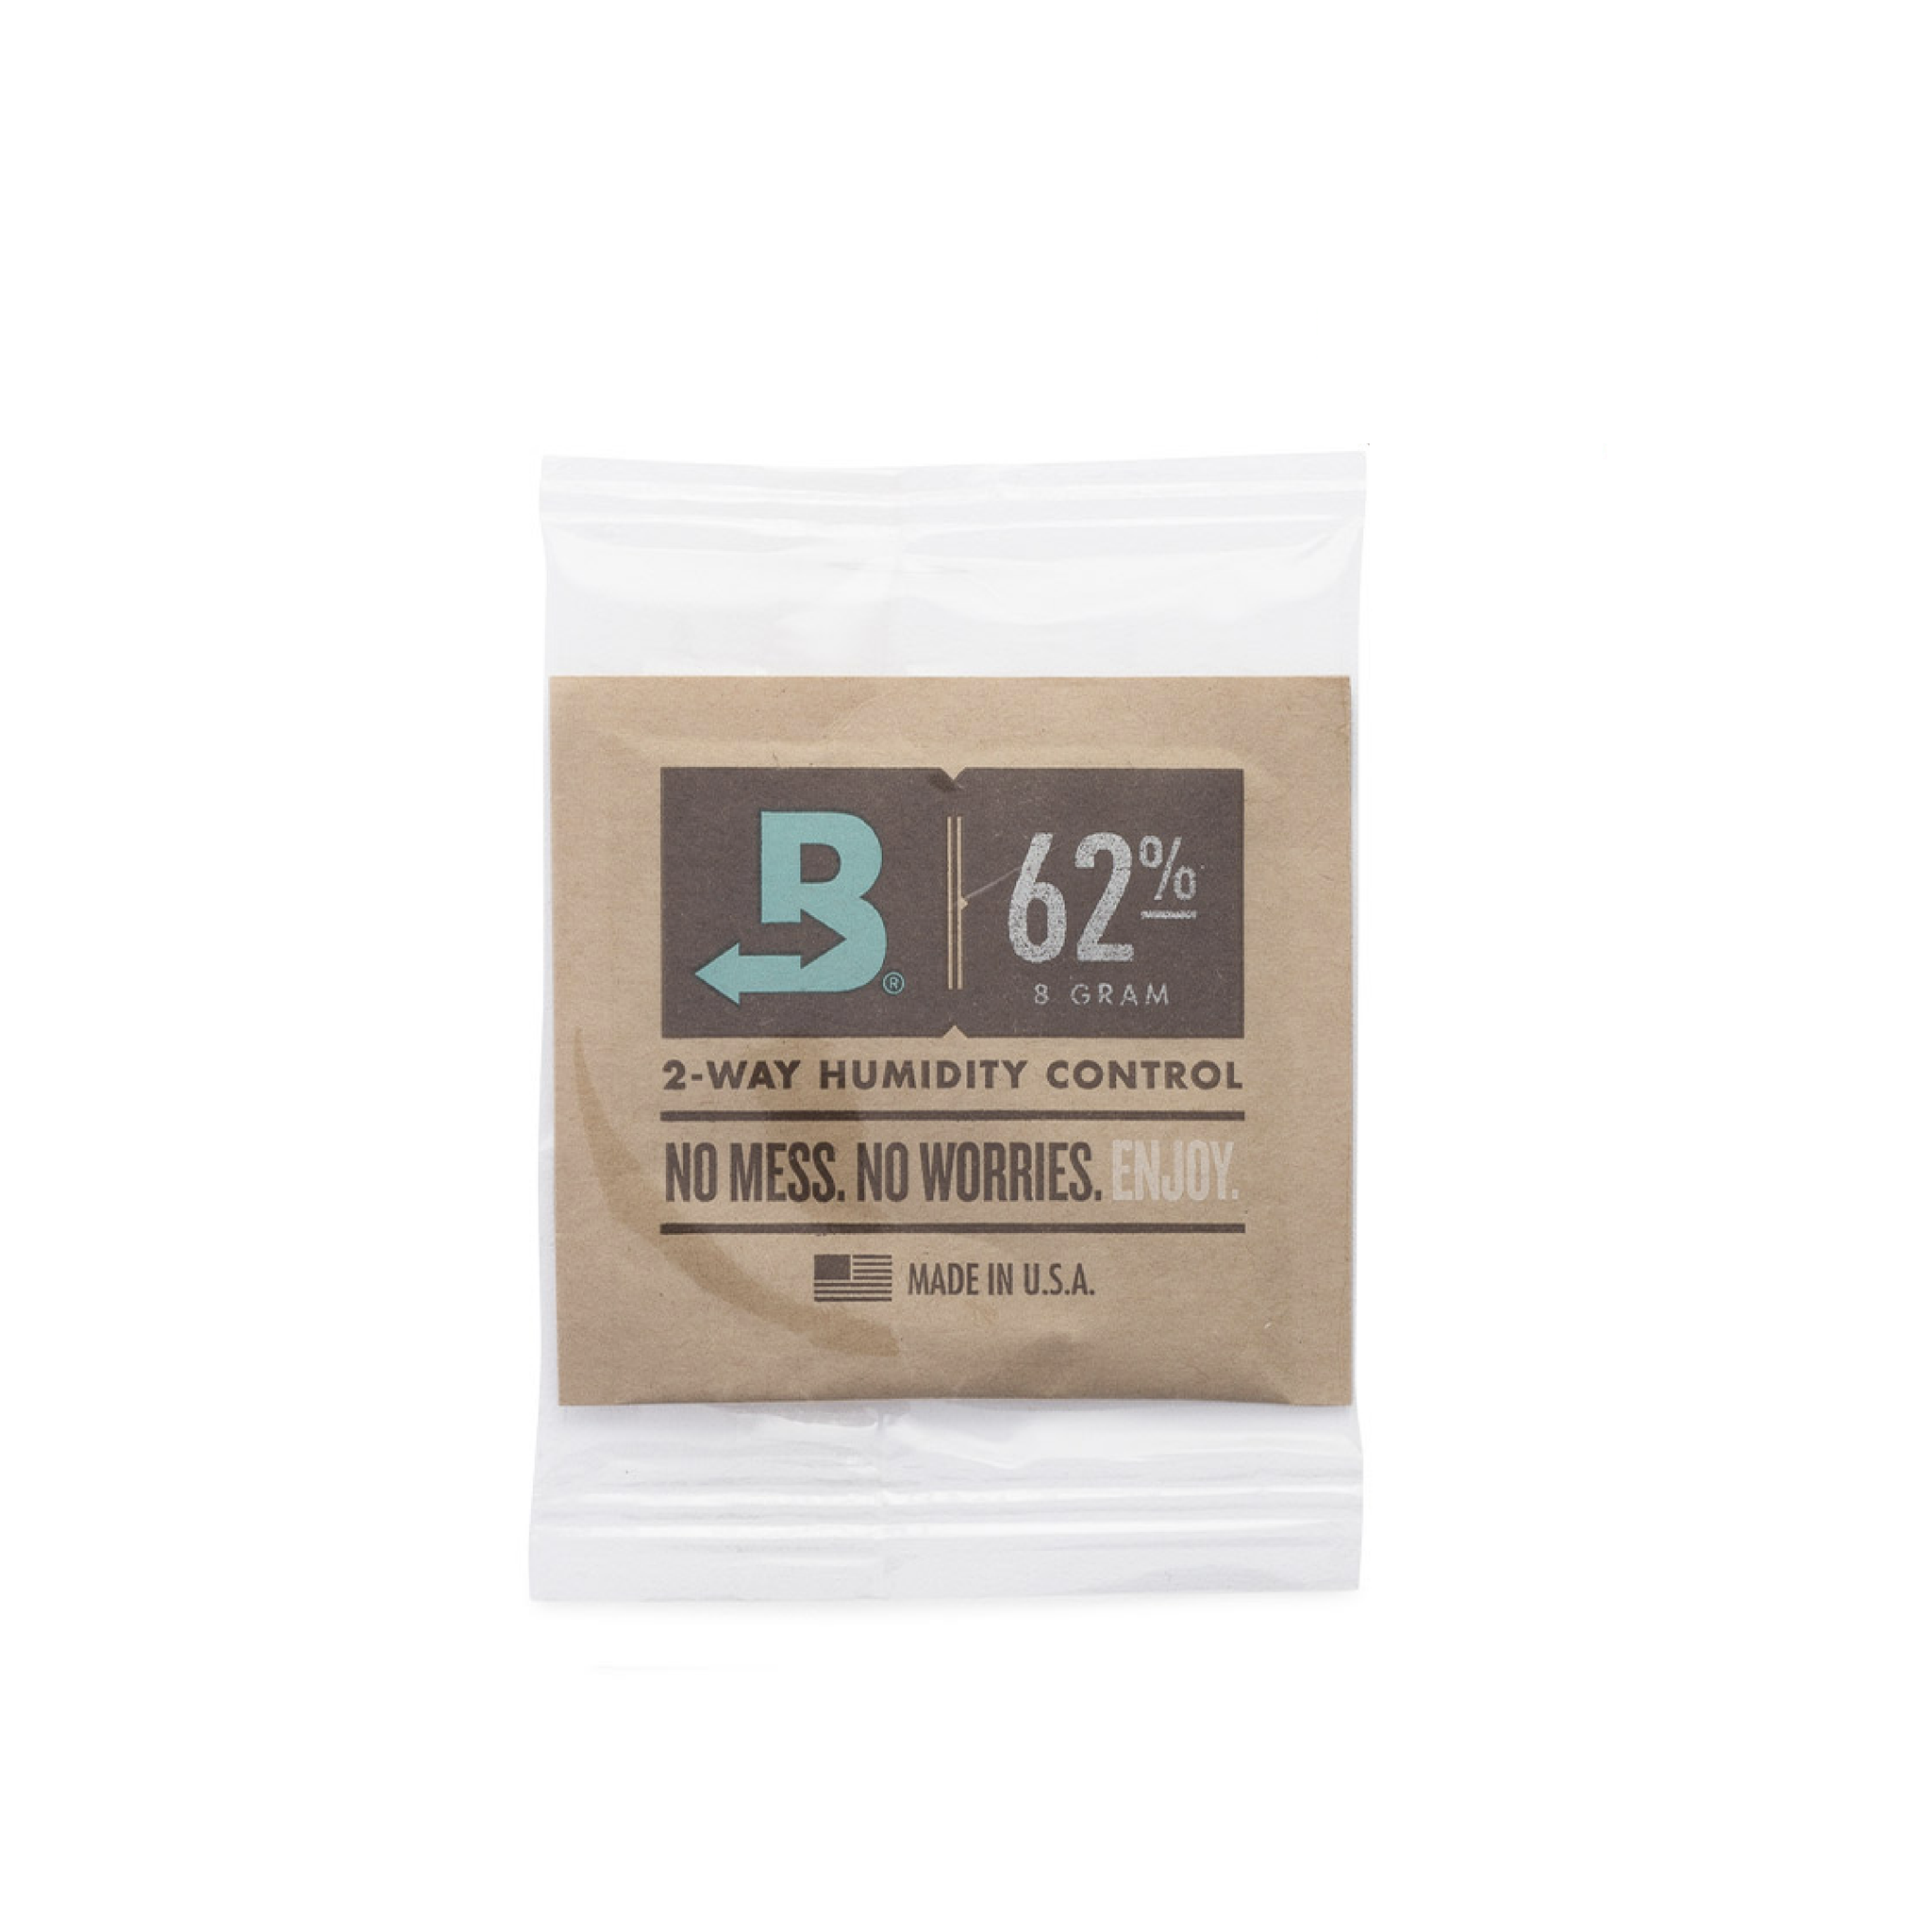 Humidity Control Pack 8G/62%